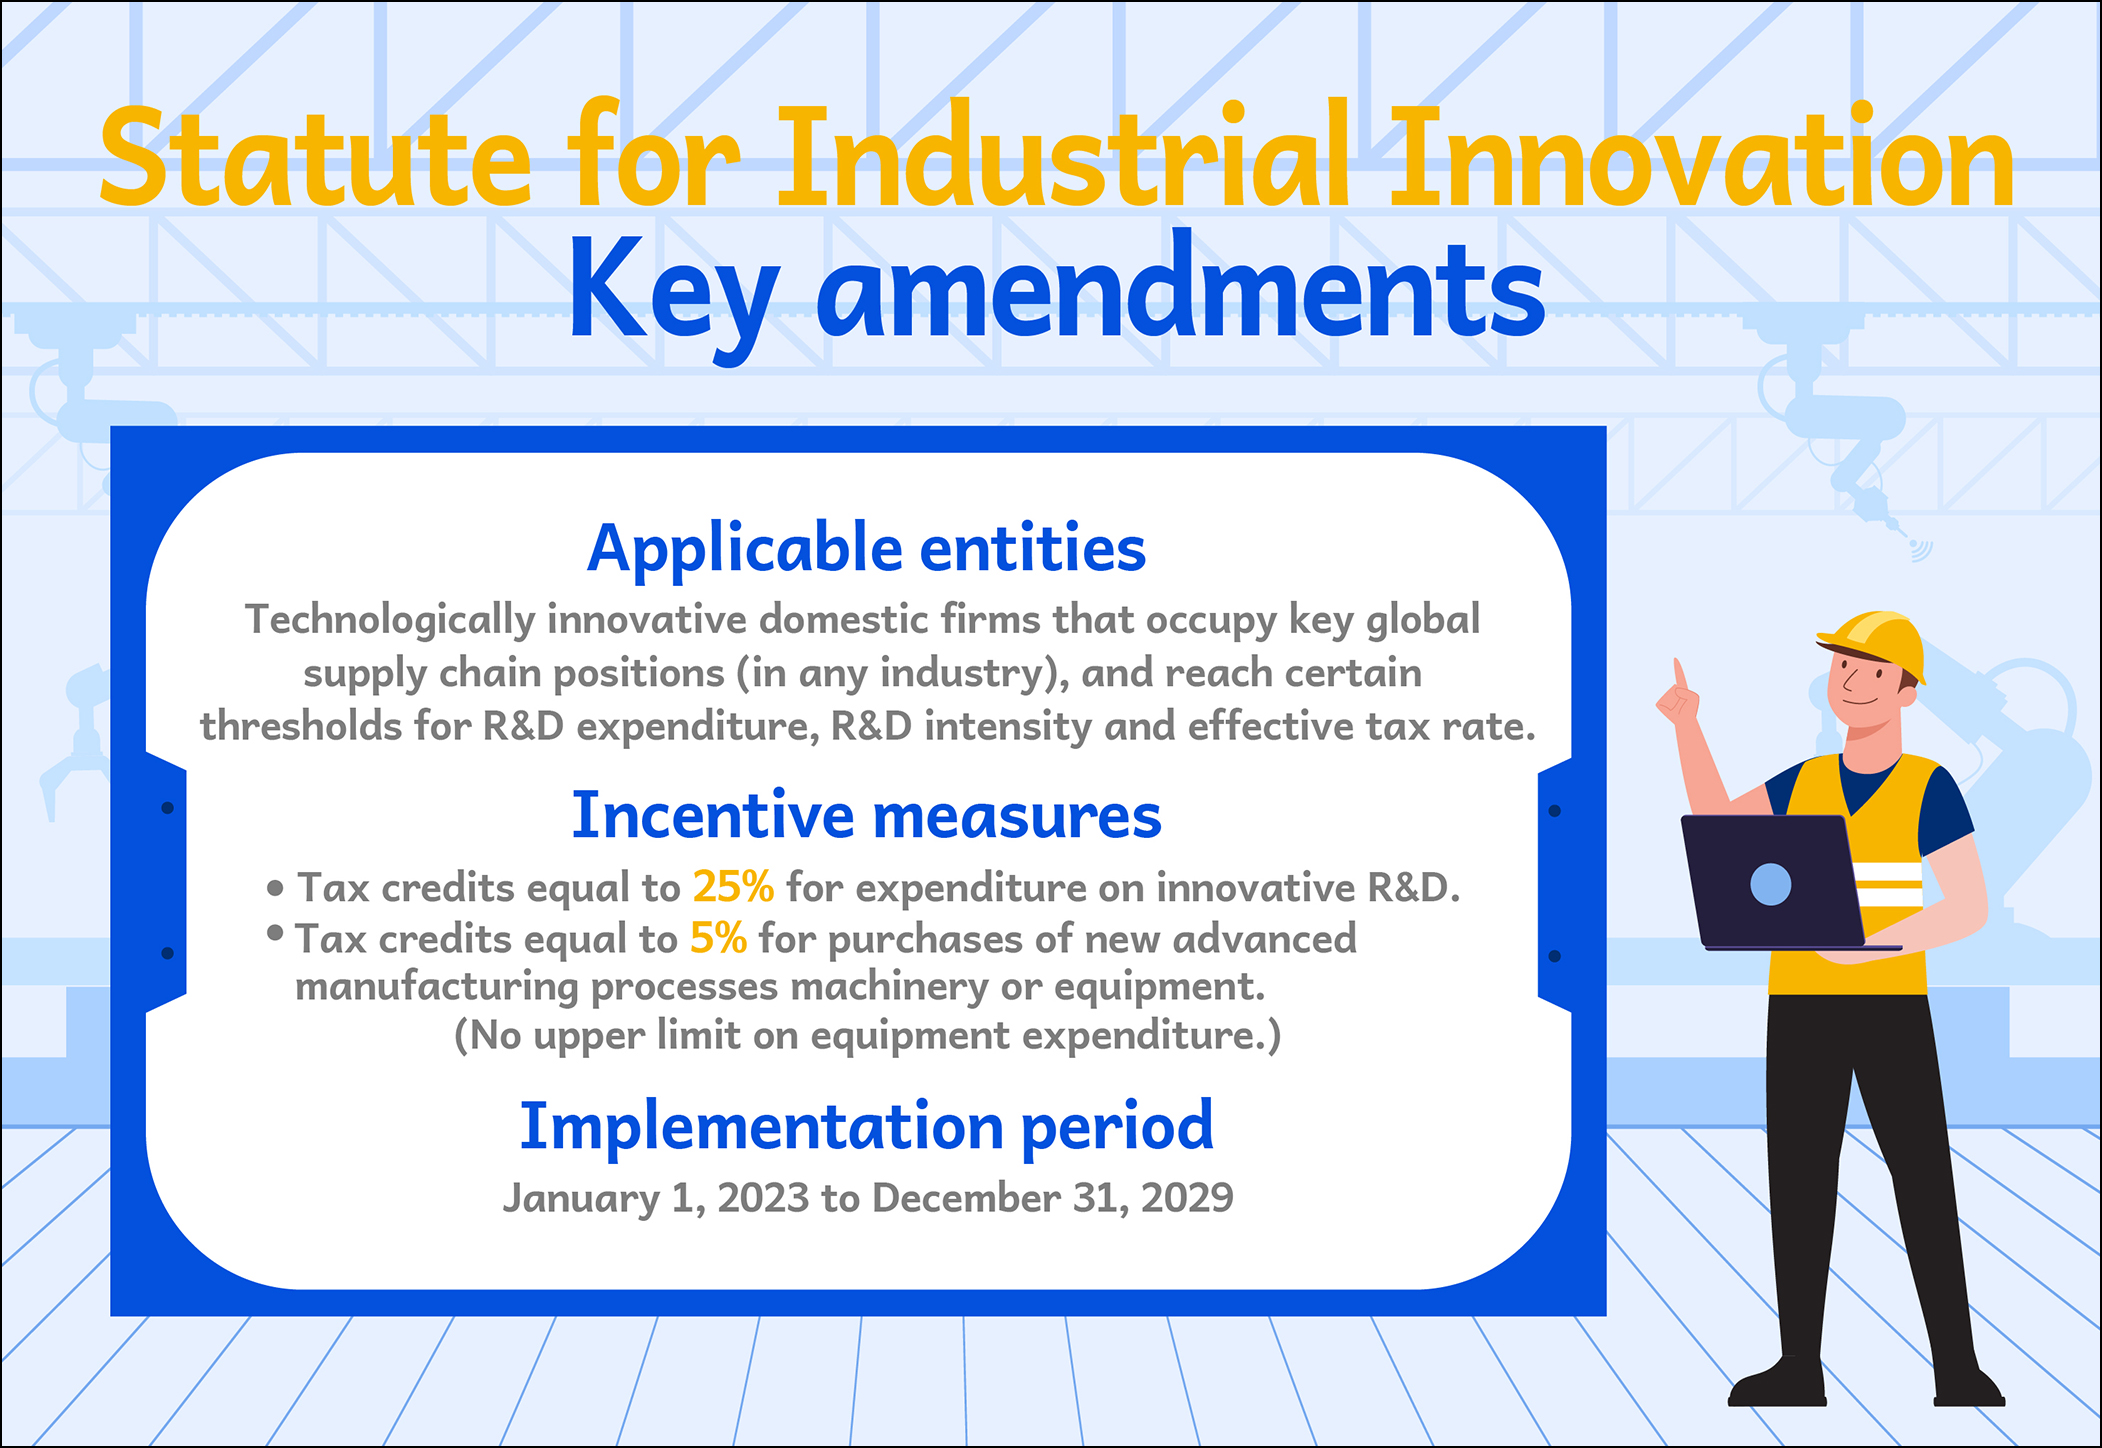 Draft amendments to the Statute for Industrial Innovation